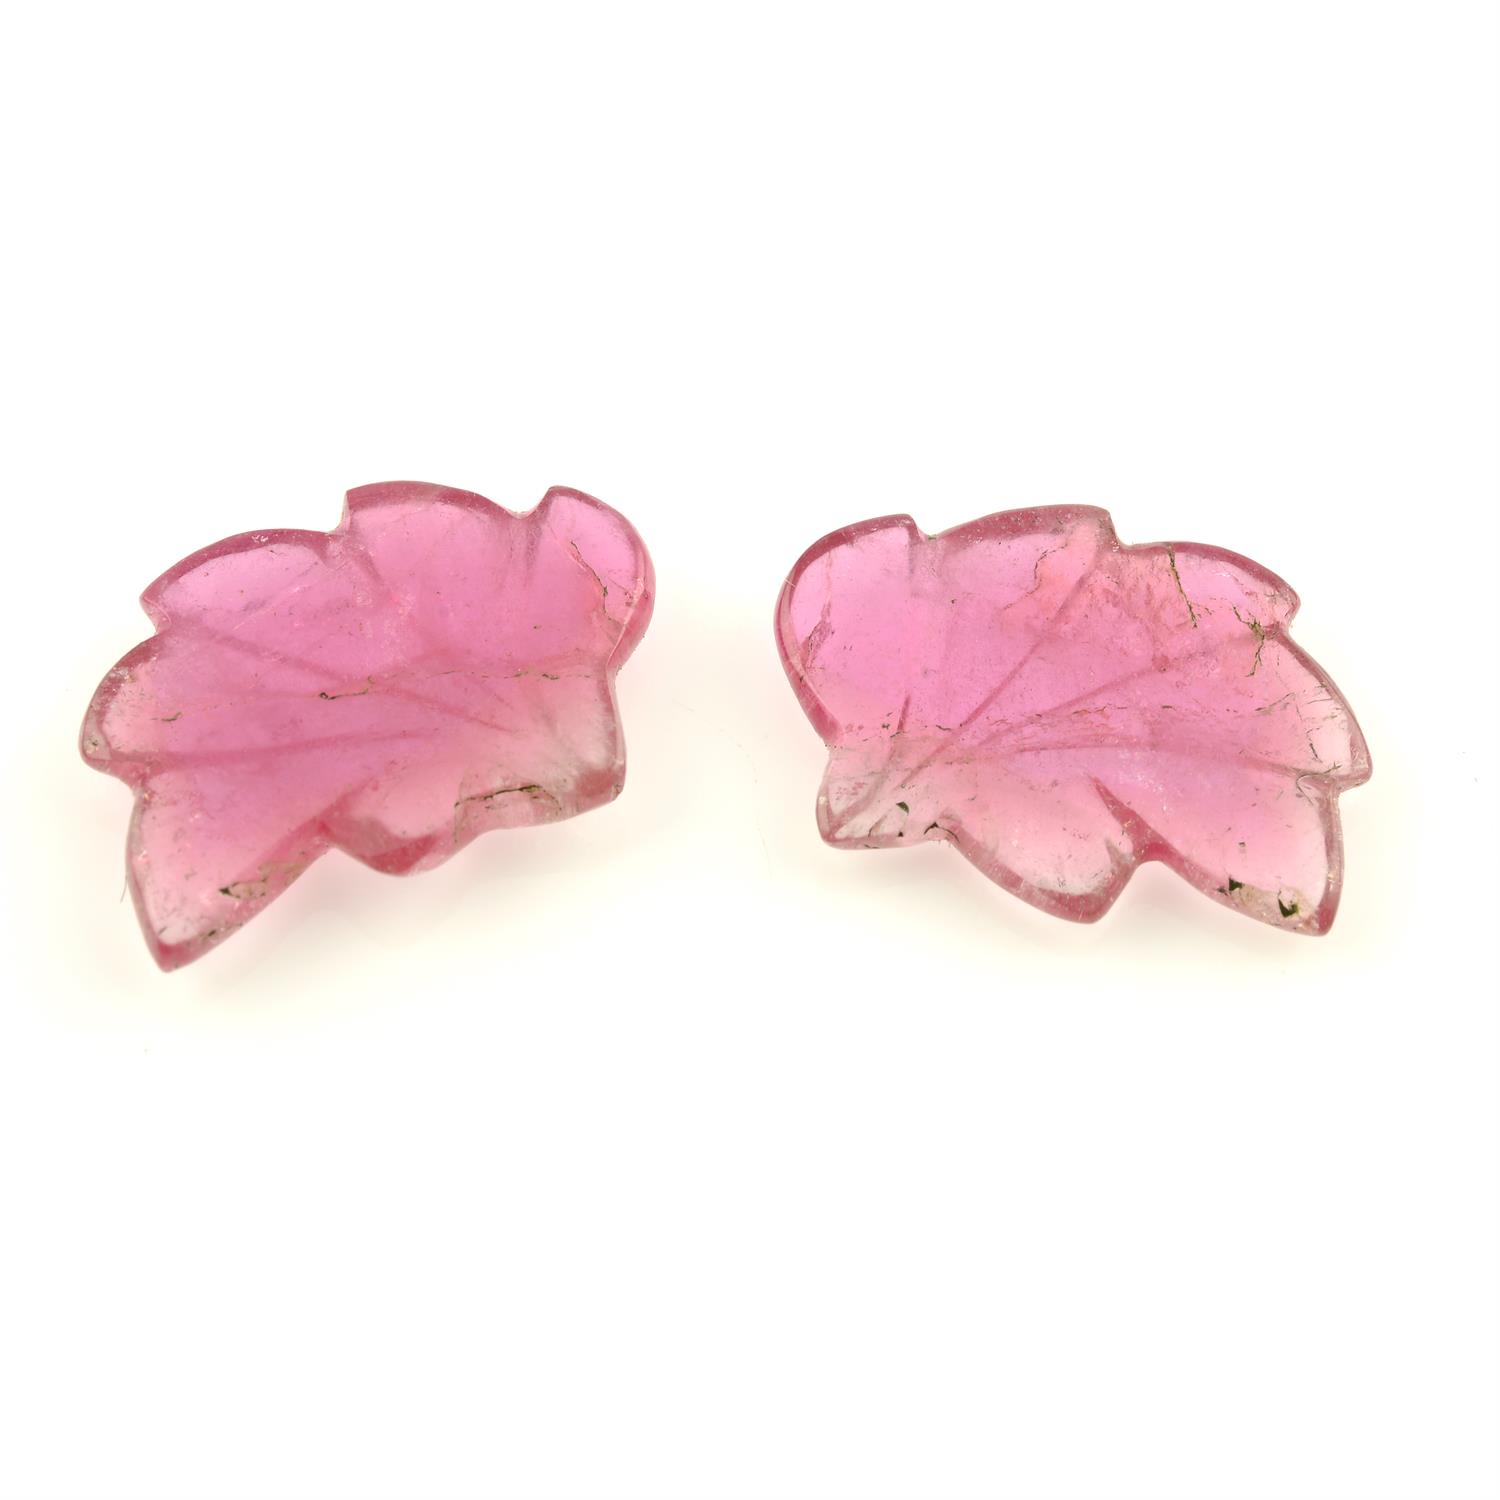 A pair of carved pink tourmalines, carved to depict leaves, weighing 7.51cts. - Image 2 of 2